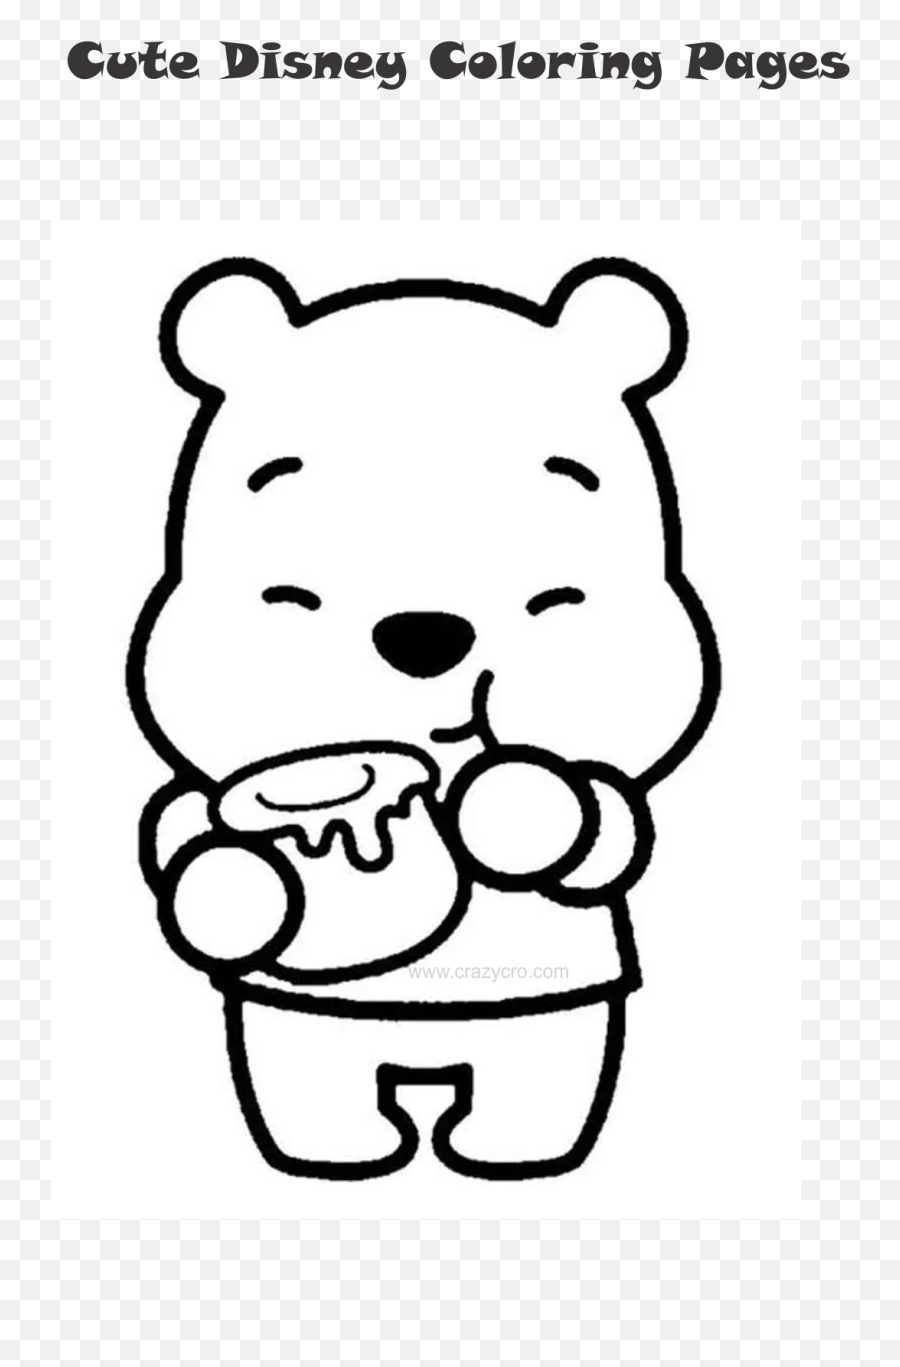 Cute Disney Coloring Page - Winnie The Pooh Coloring Pages Easy Emoji,Emoji Color Pages